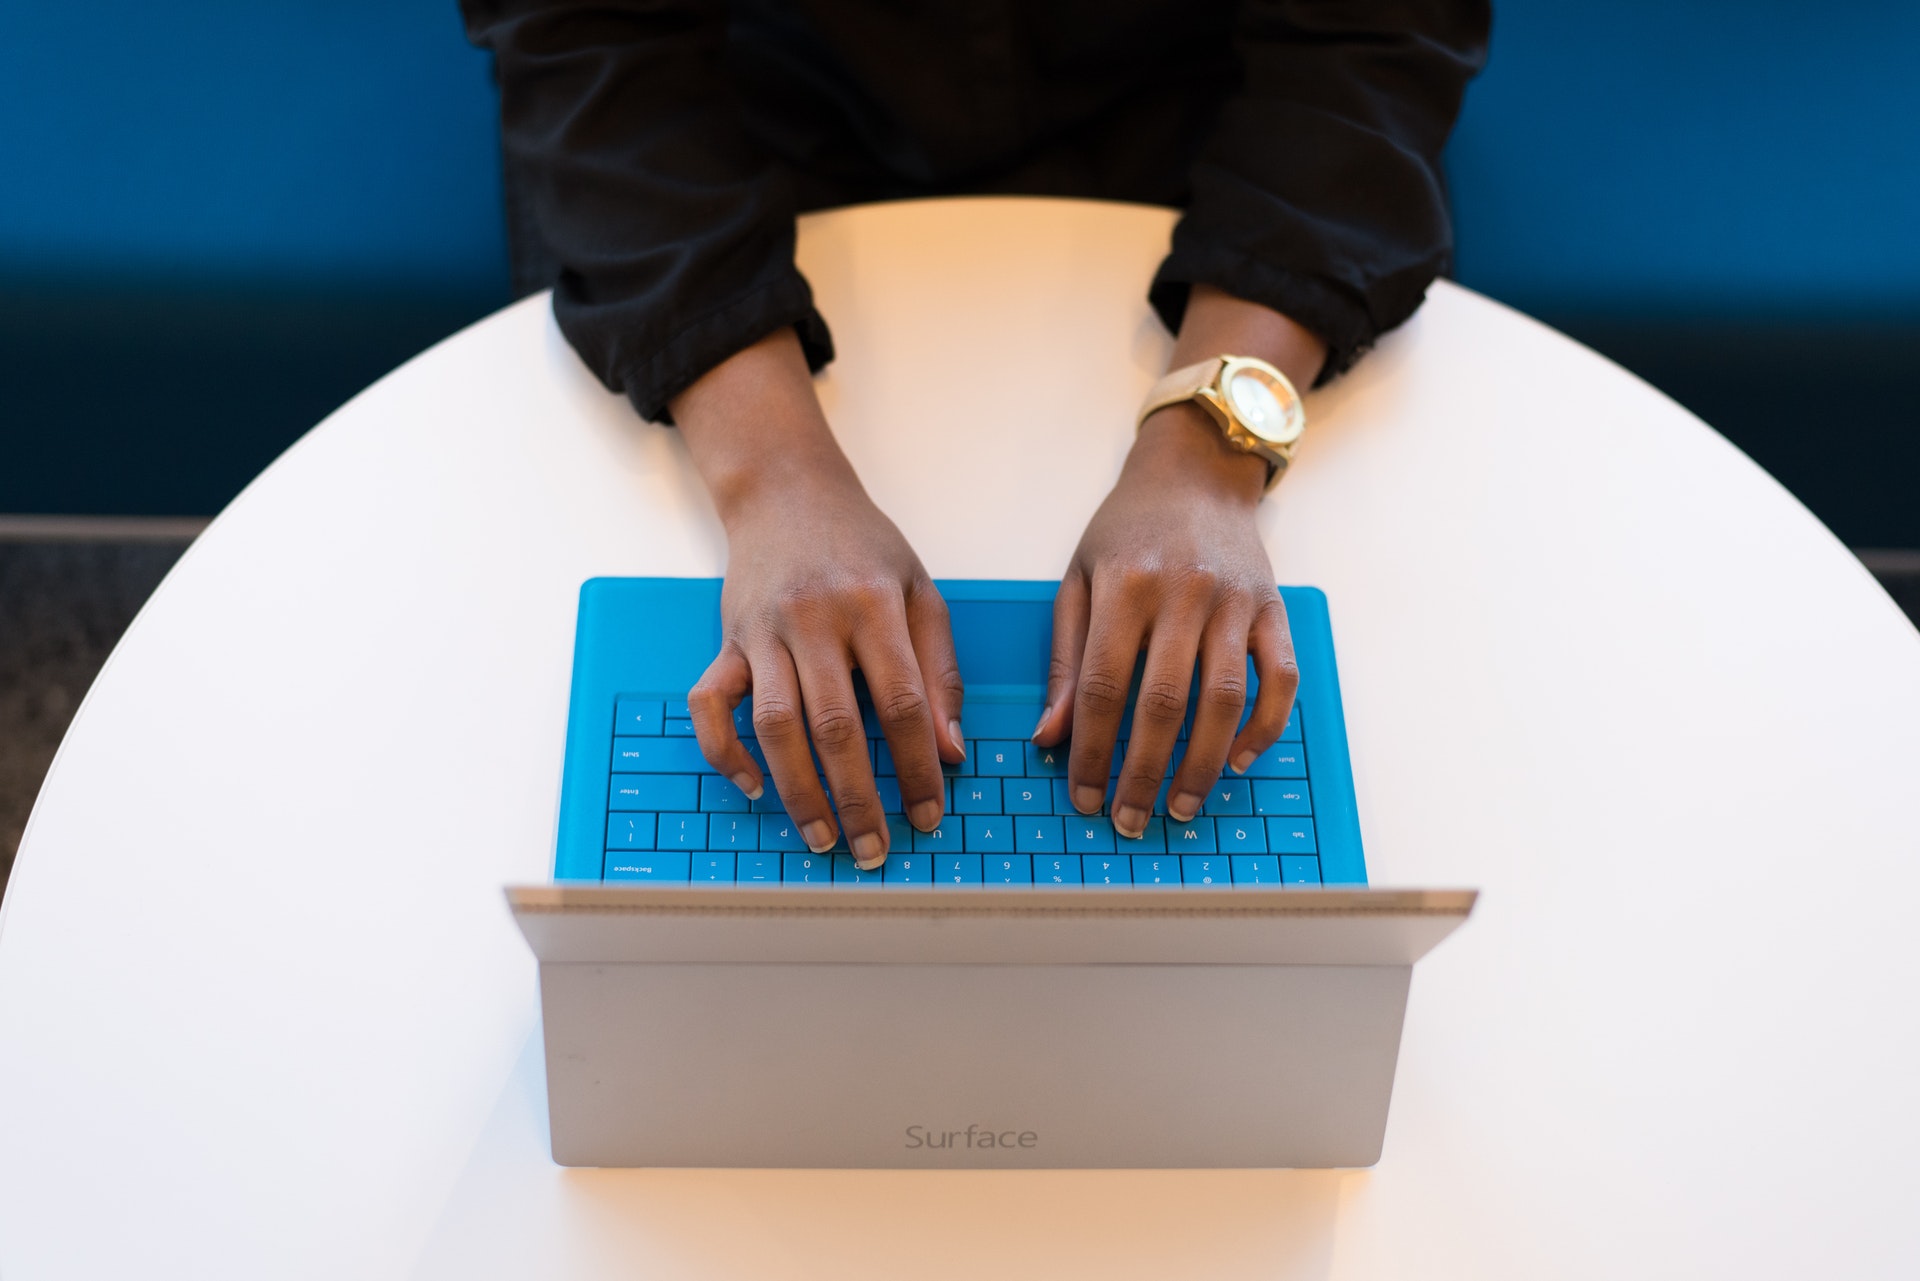 Photo of a Black person's hands typing on a laptop with a blue keyboard